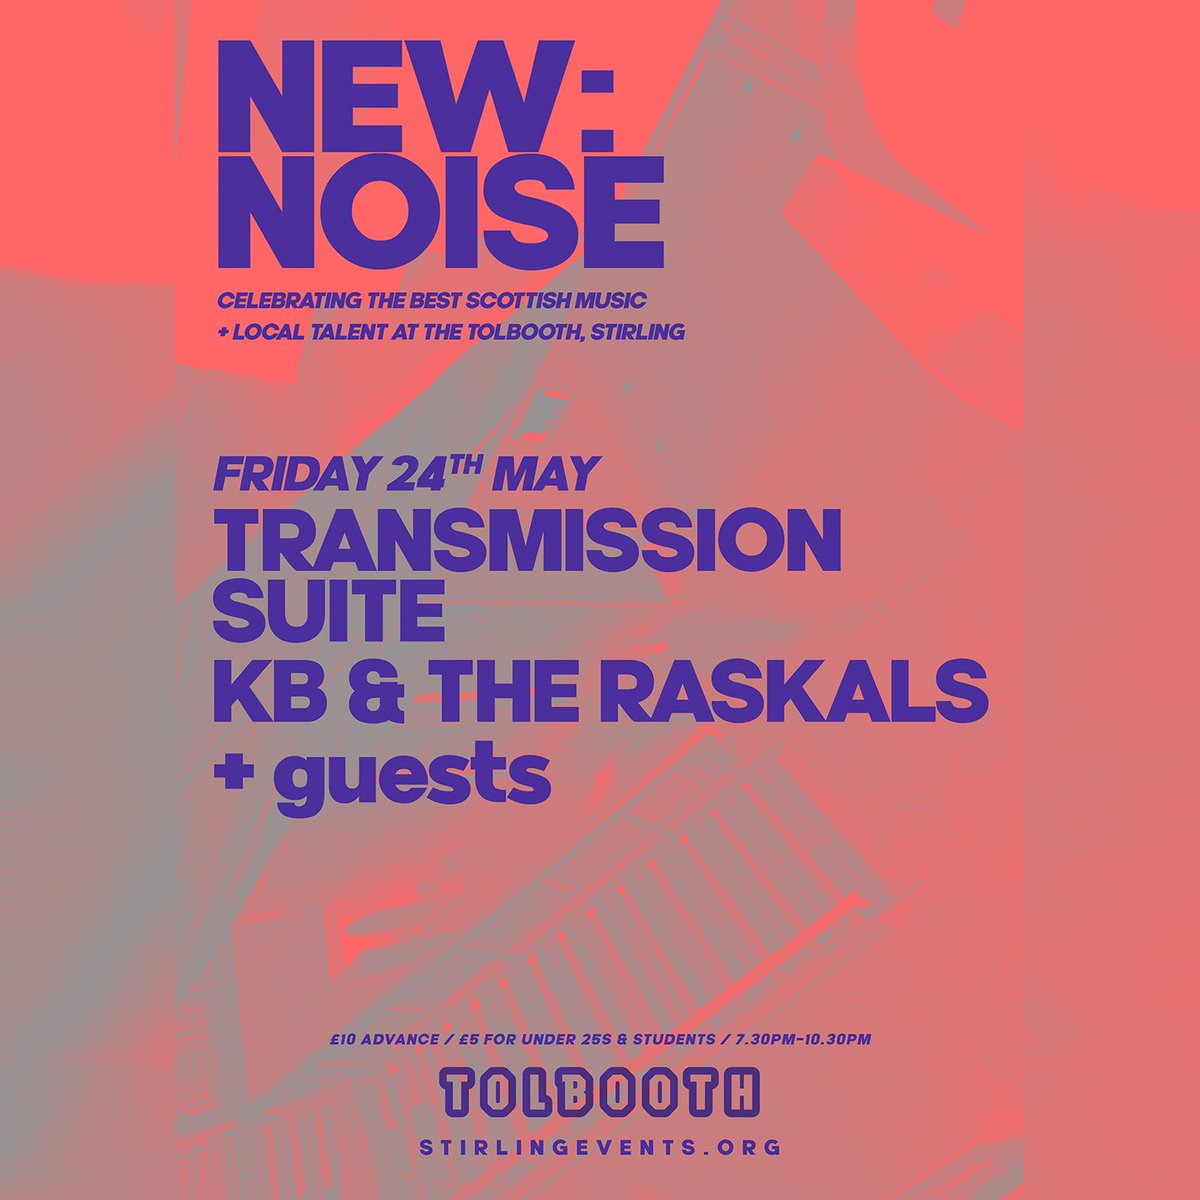 We are delighted to announce a hometown headline show in Stirling at @Tolbooth on the 24th of May. The excellent KB & The Raskals will be supporting so be sure to get in early! You can grab your tickets here: stirlingevents.org/tolbooth-event…